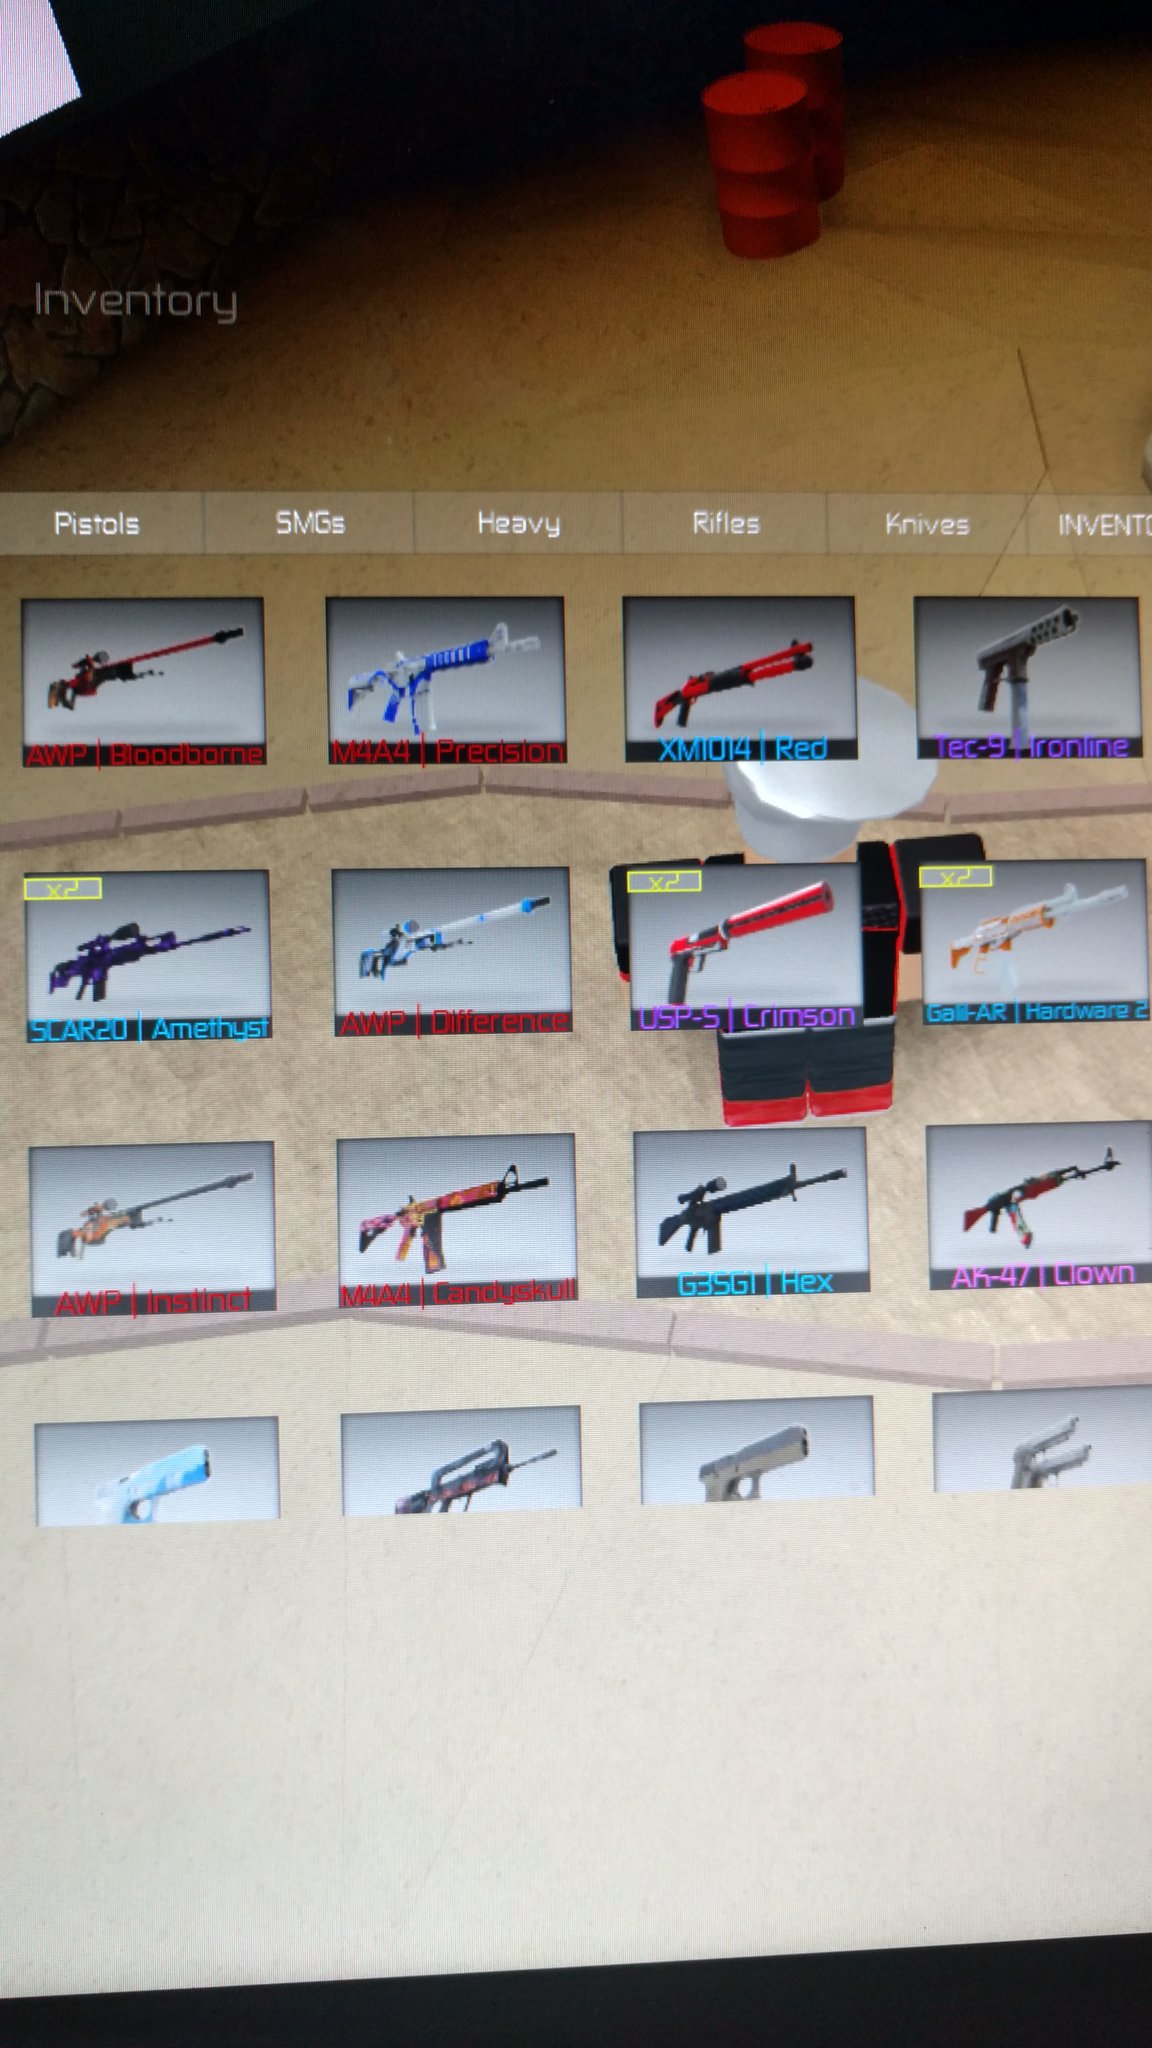 Syncridge On Twitter Trading Whole Inventory For Low Demand Stock Knife Roblox Counterbloxrobloxoffensive Cbro Counterblox - cbro confirmation roblox